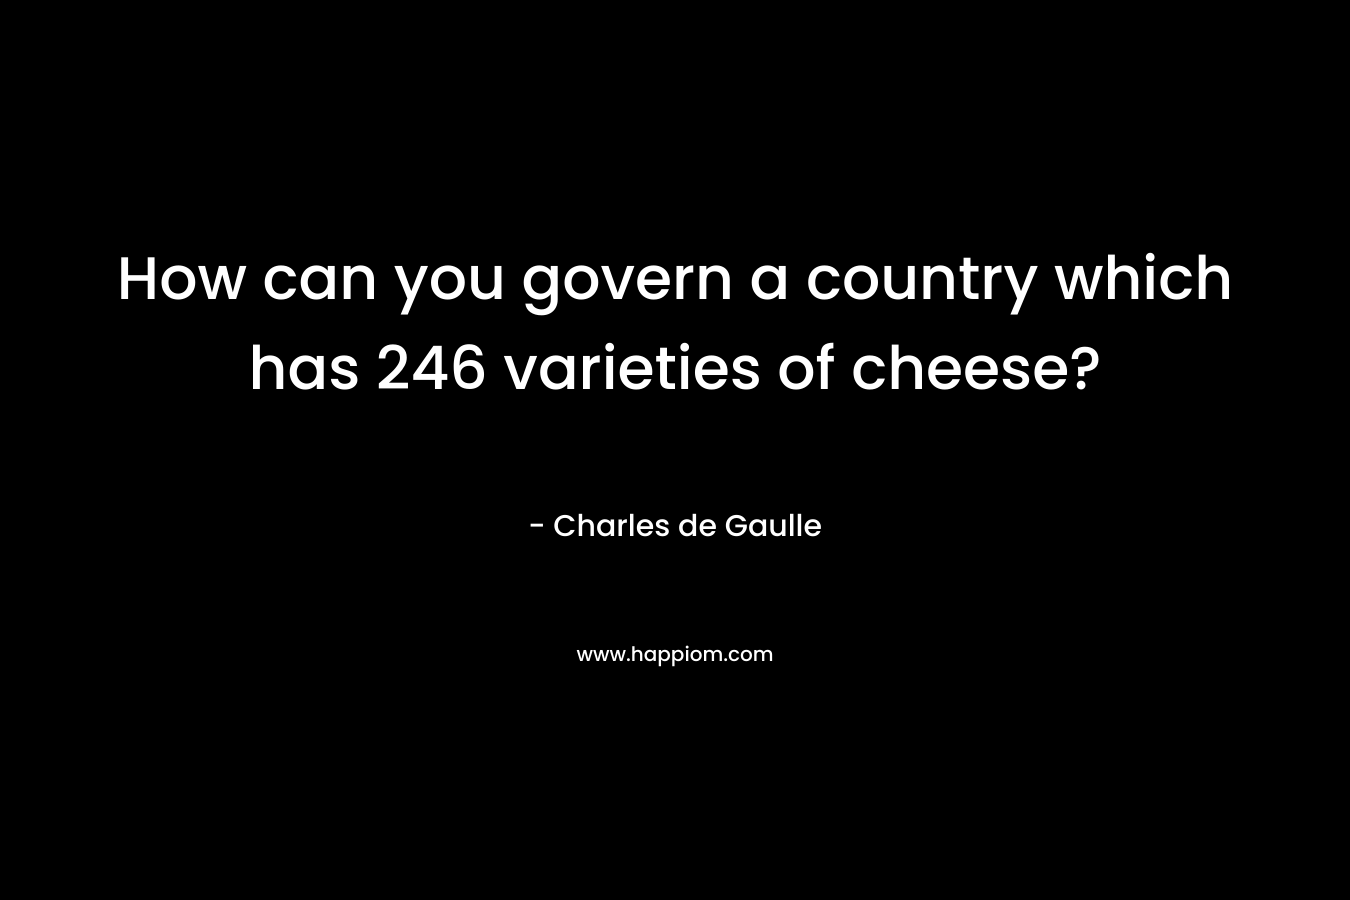 How can you govern a country which has 246 varieties of cheese?